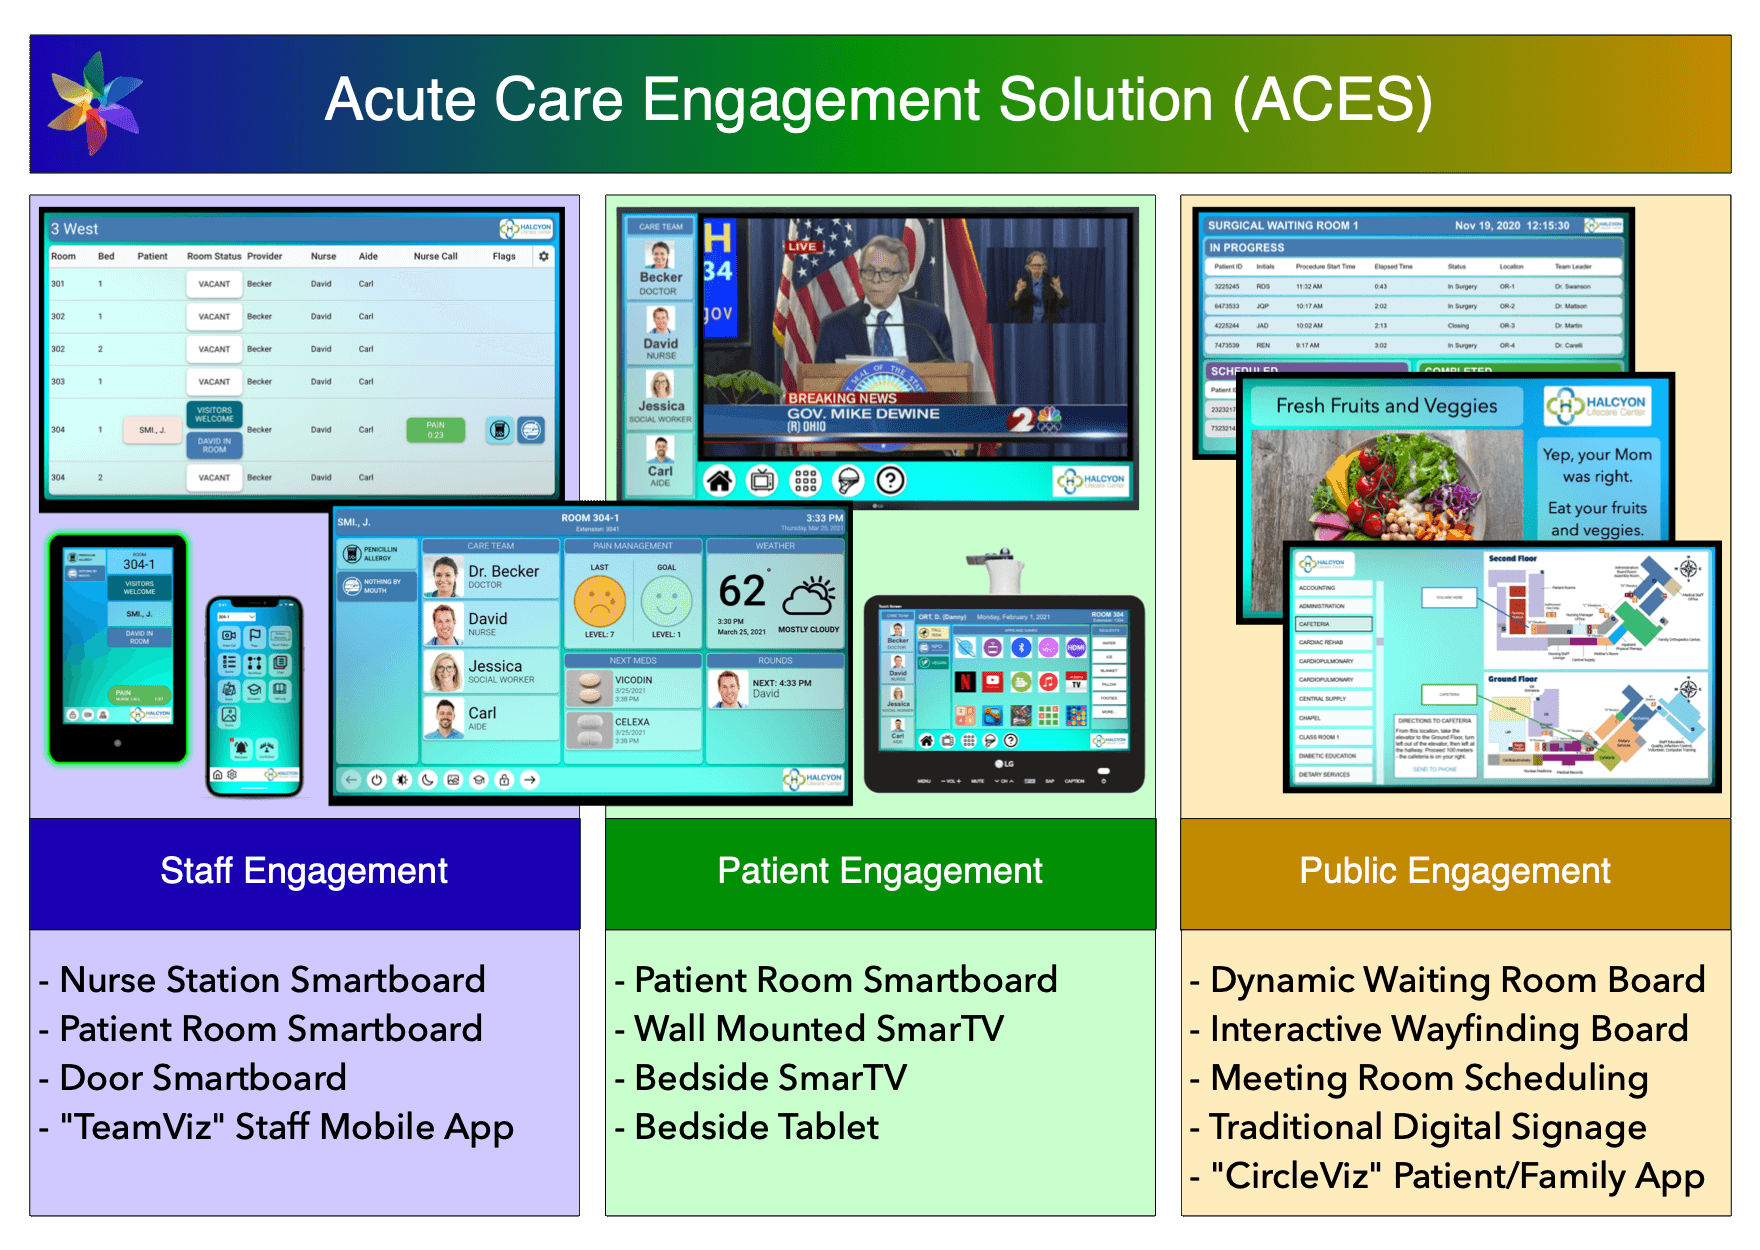 Acute Care Engagement Solution ACES Overview Image